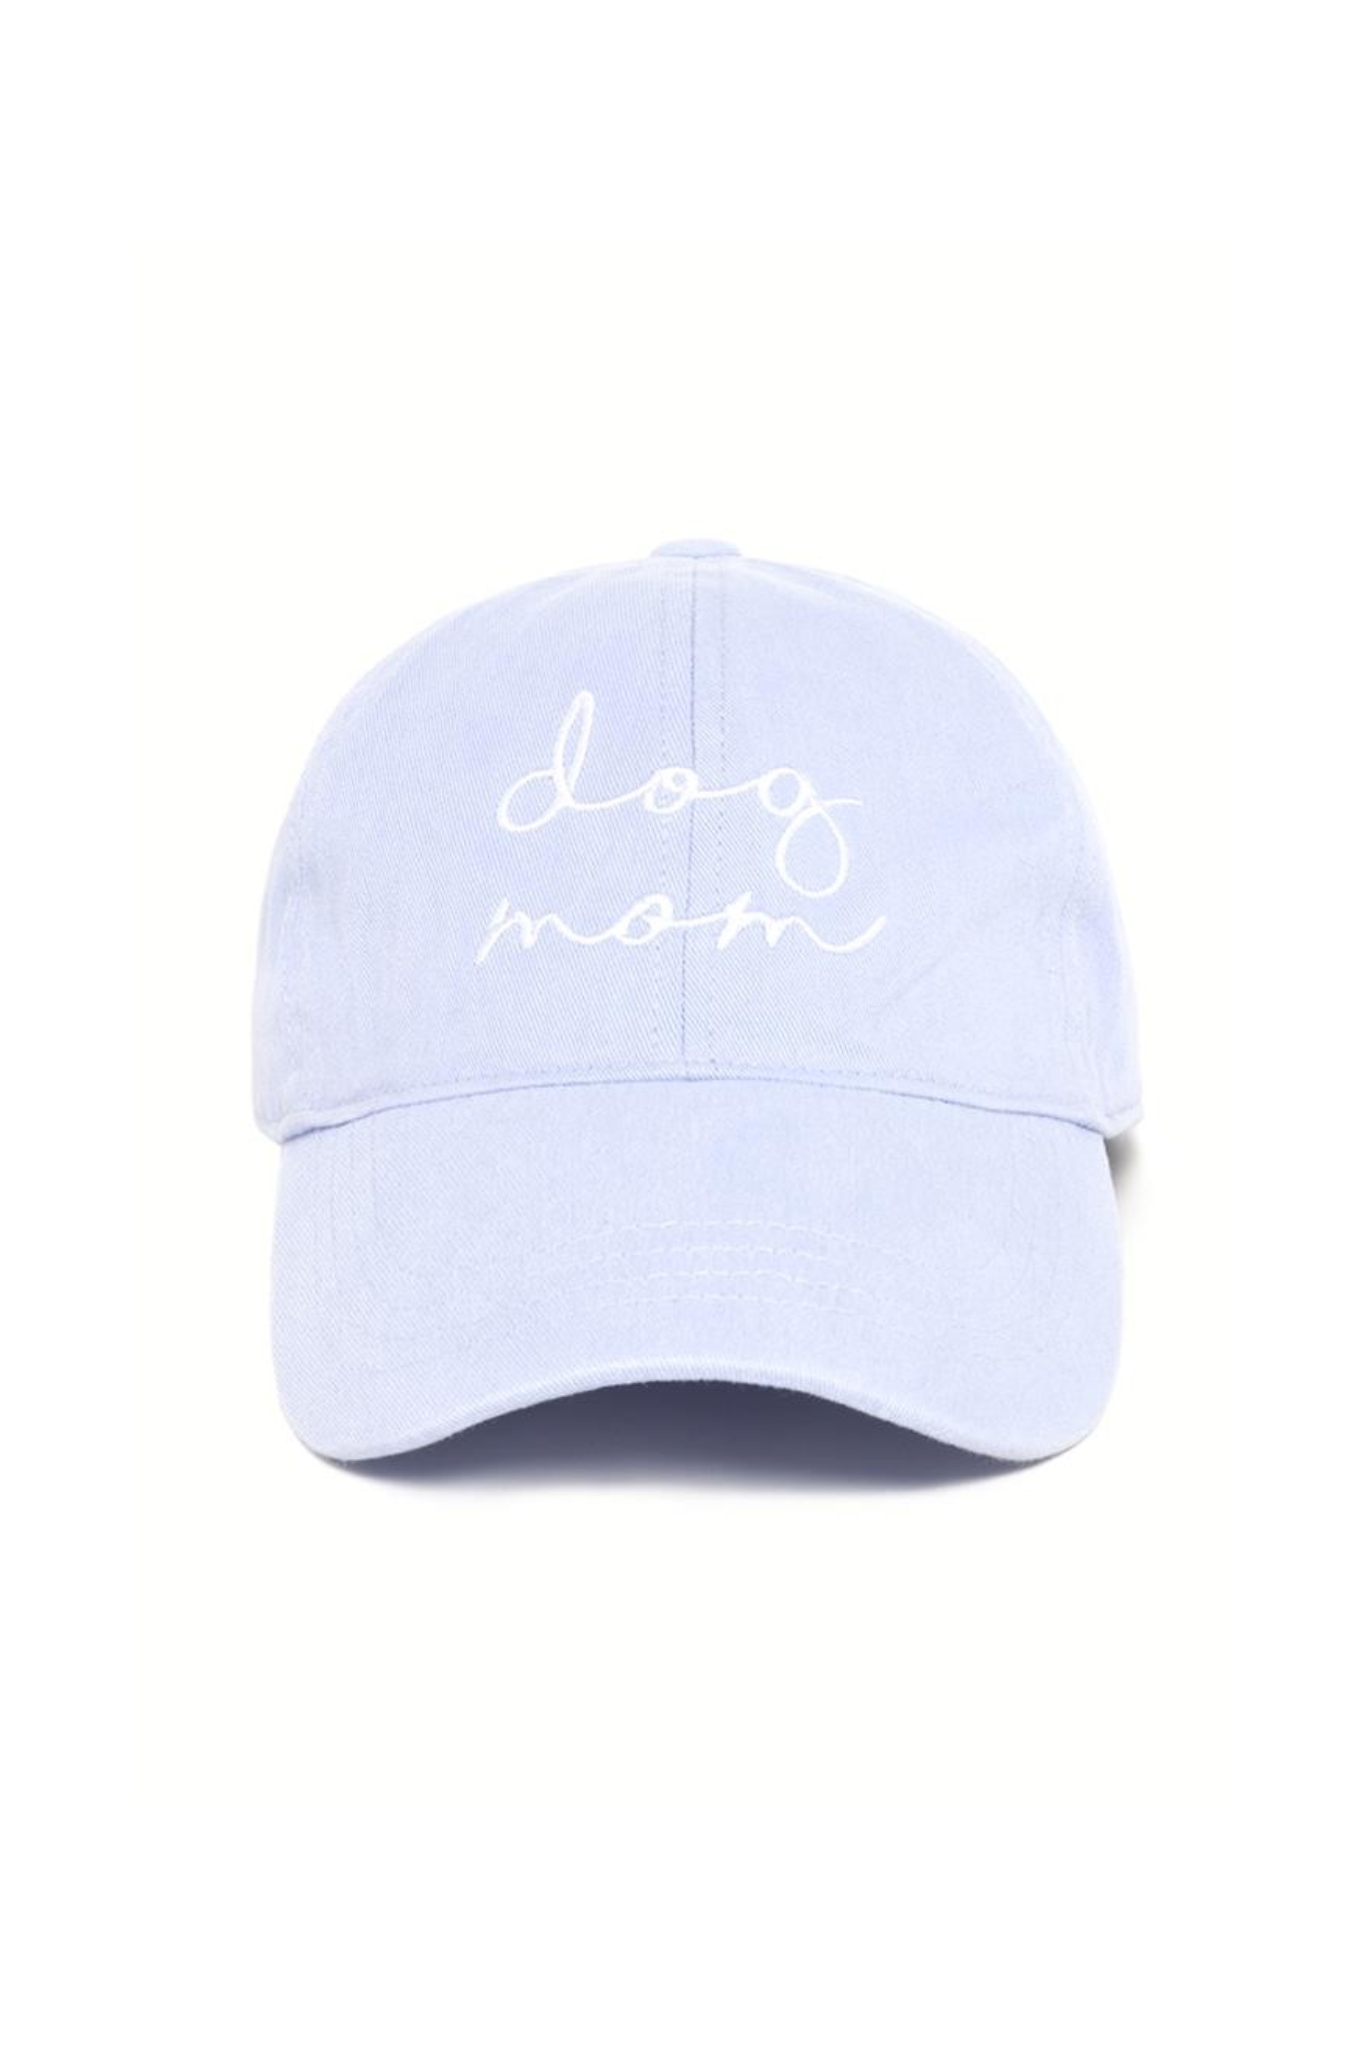 View 1 of Dog Mom Cap in Light Blue, a Hats from Larrea Cove. Detail: 
Introducing the Dog Mom Cap i...